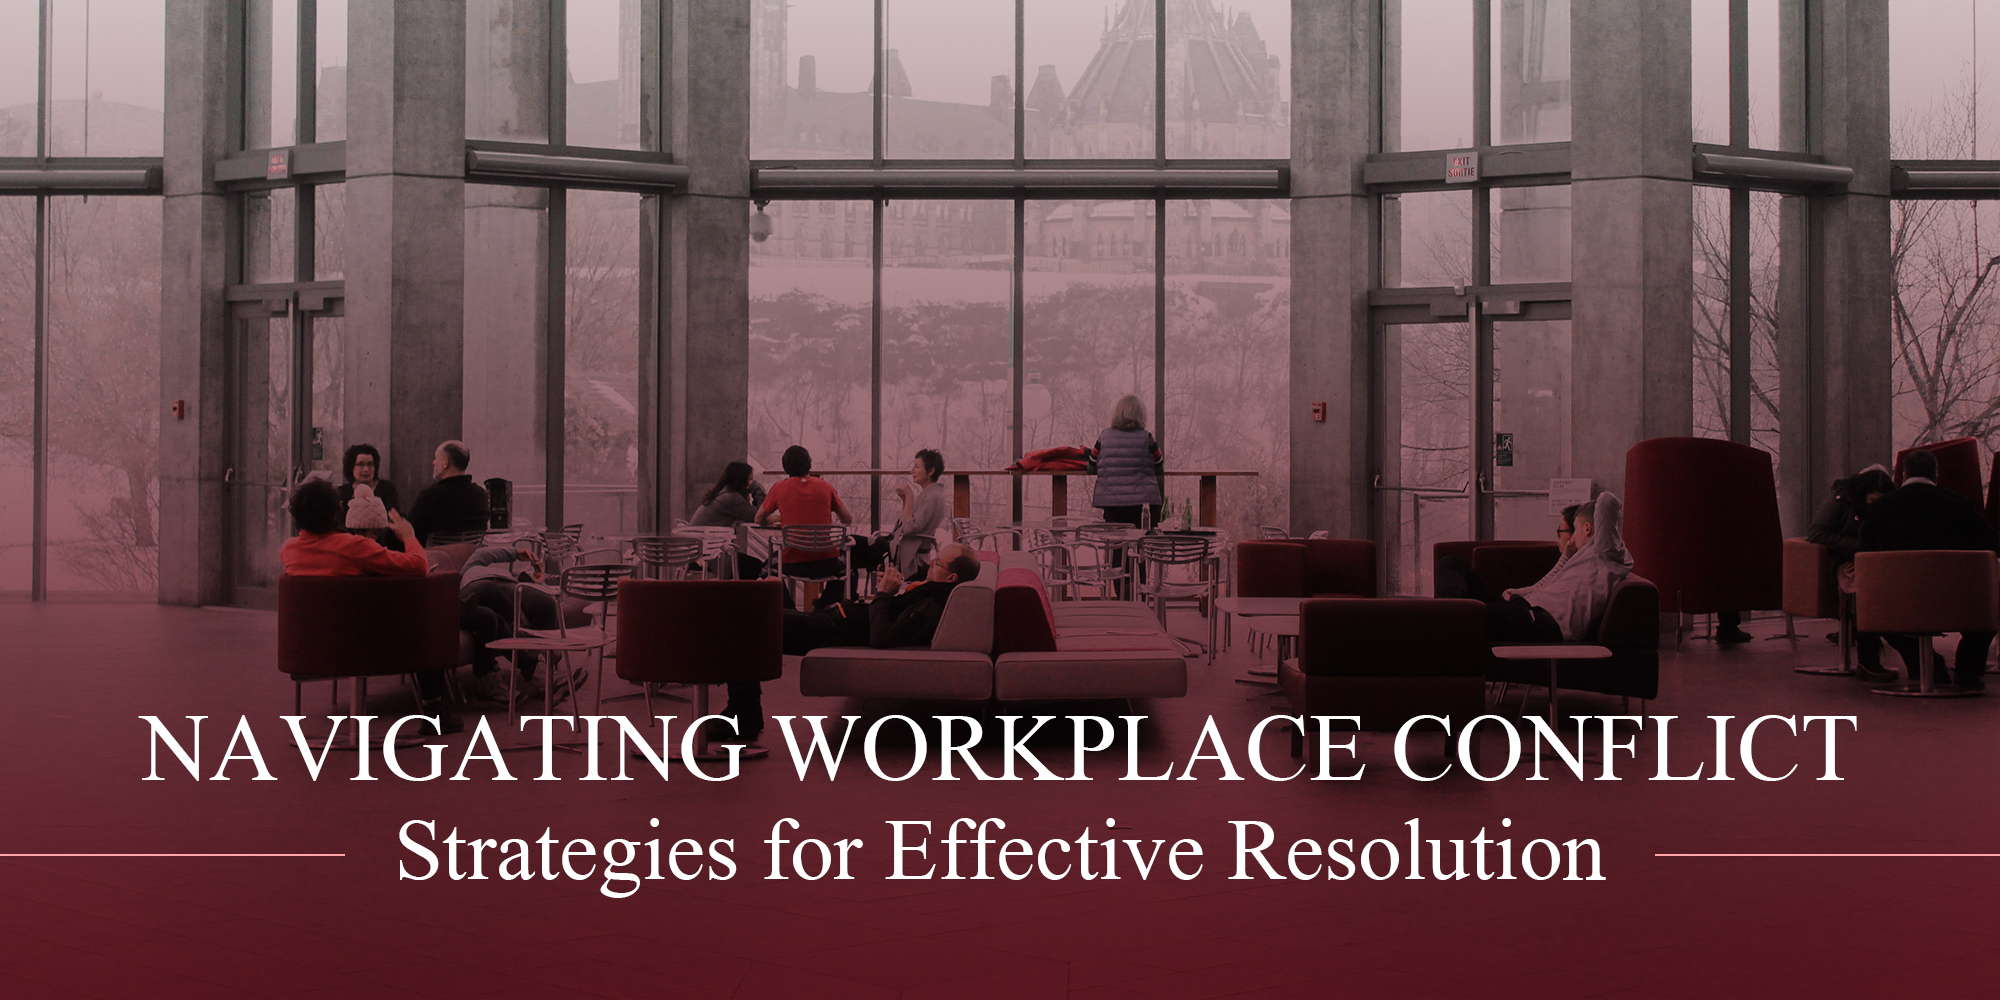 Navigating Workplace Conflict: Strategies for Effective Resolution